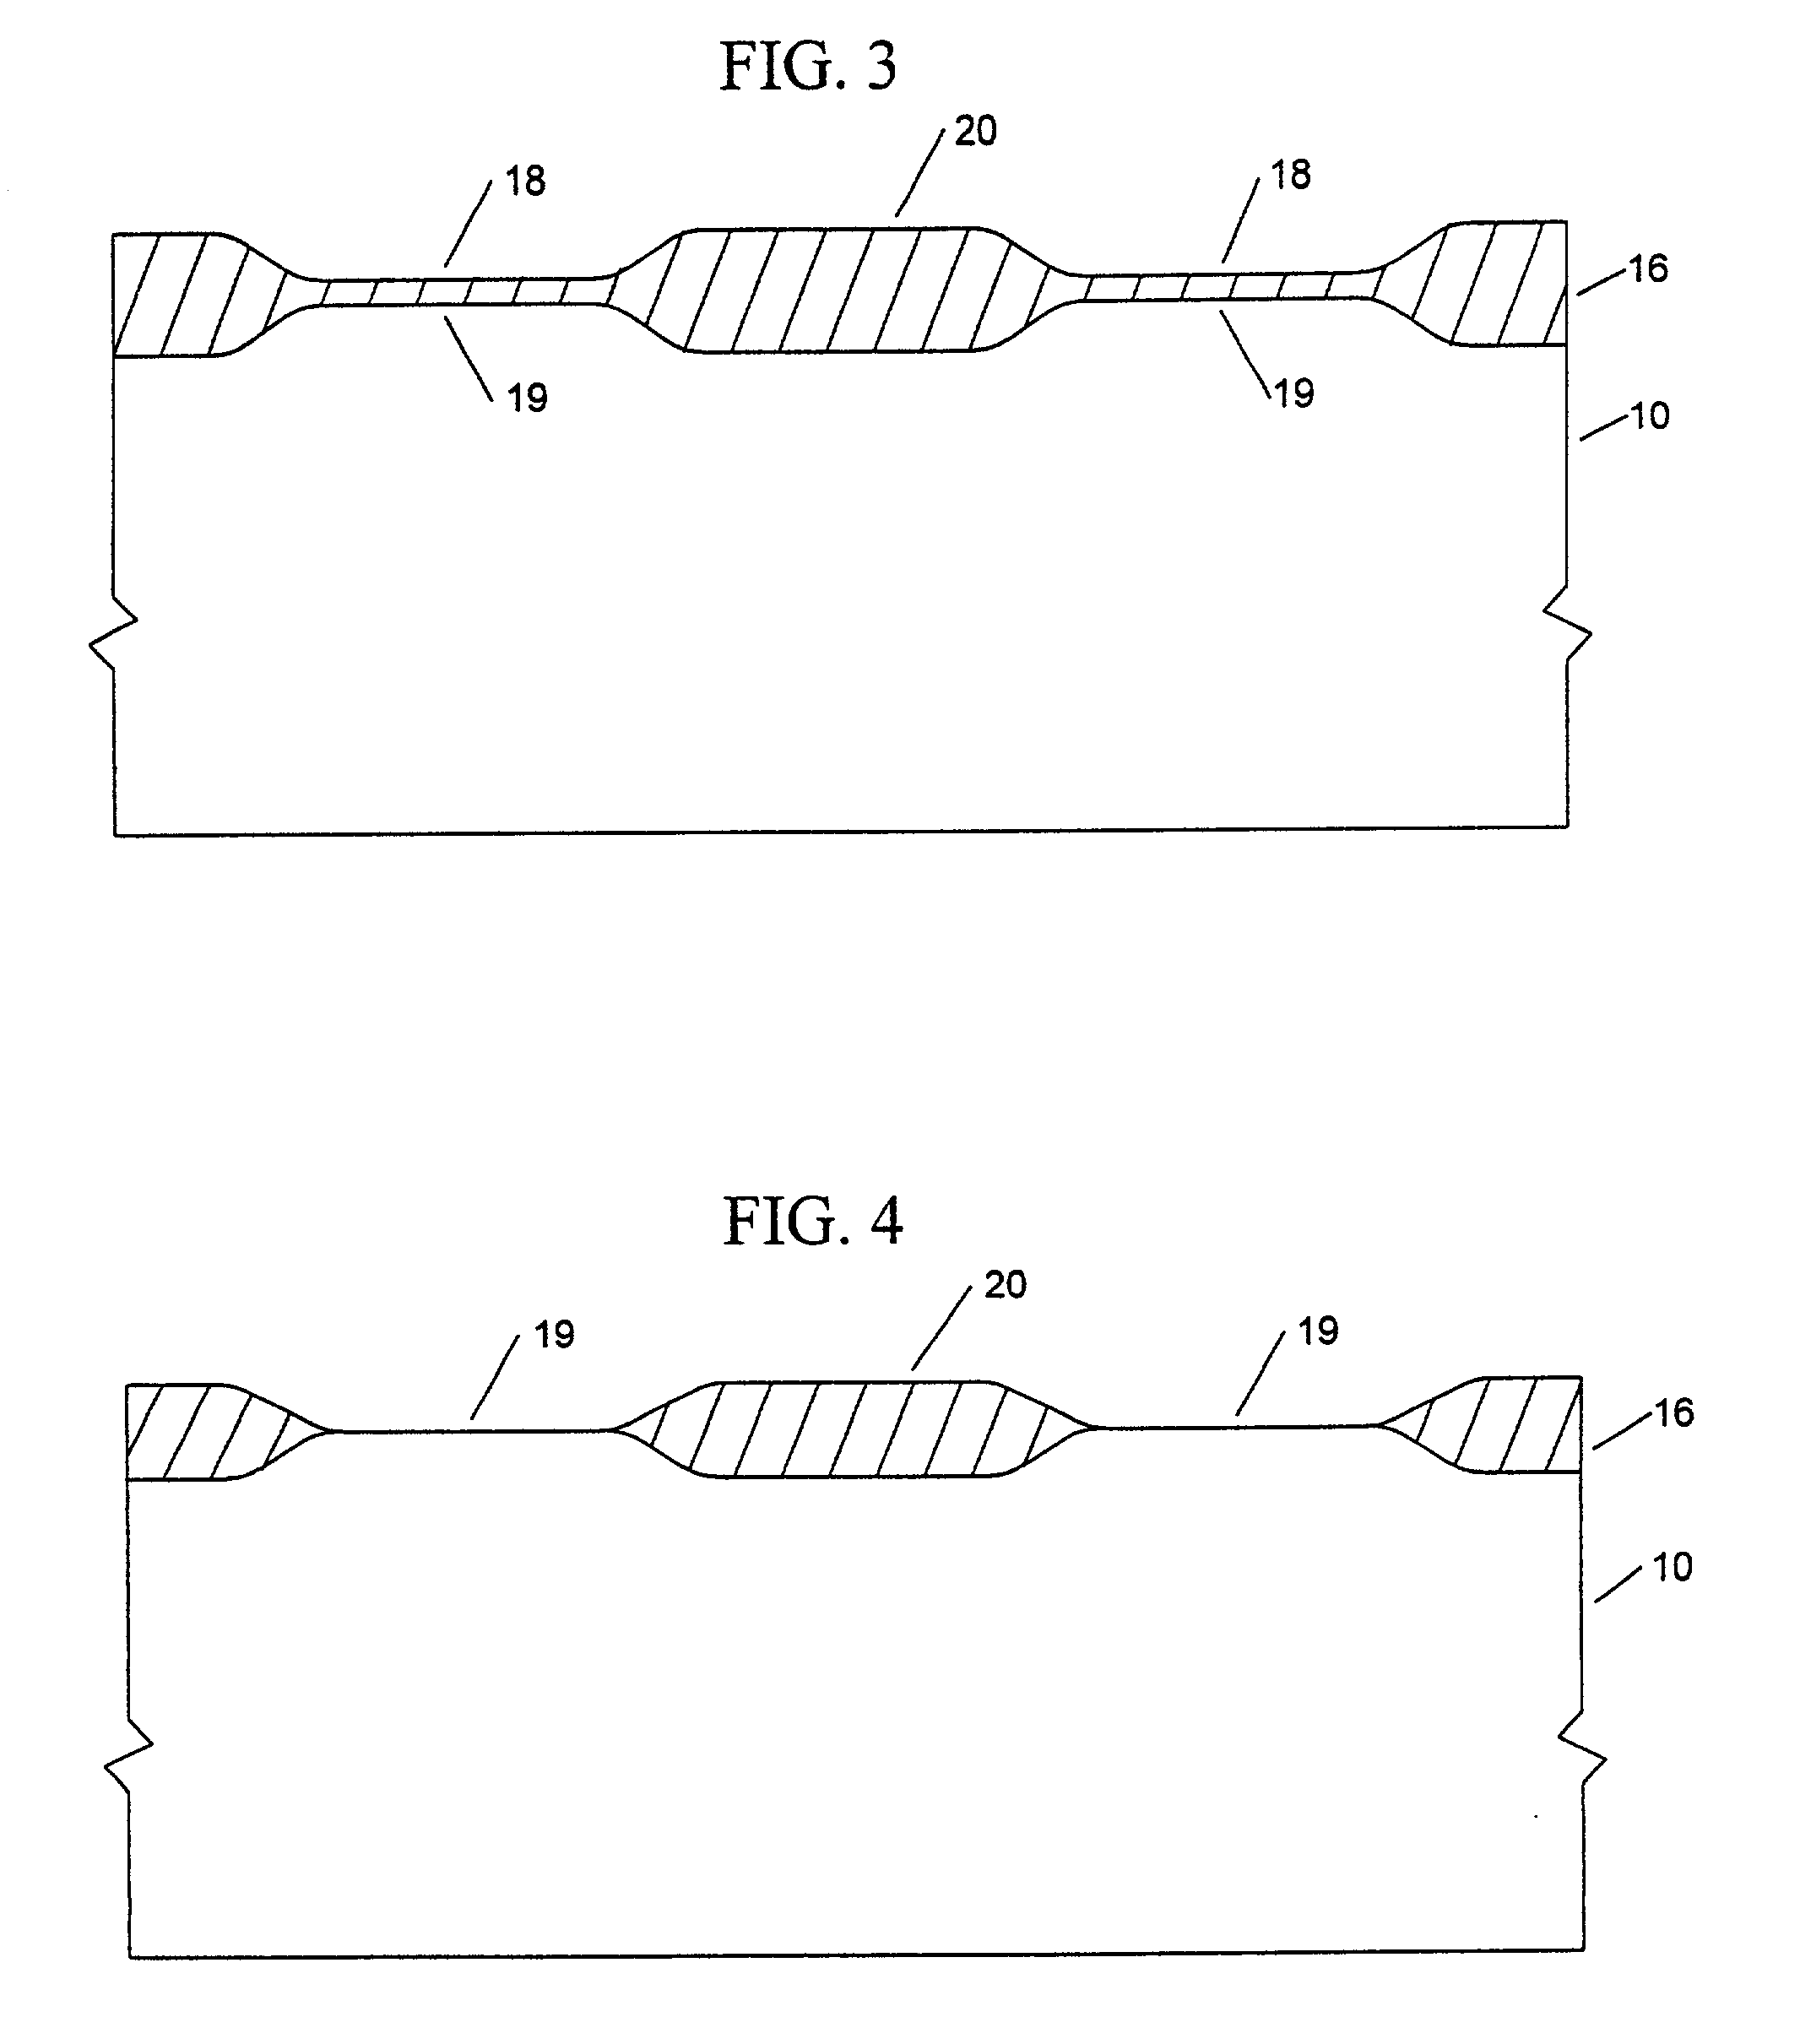 A Method Of Fabricating A DRAM Transistor With A Dual Gate Oxide Technique